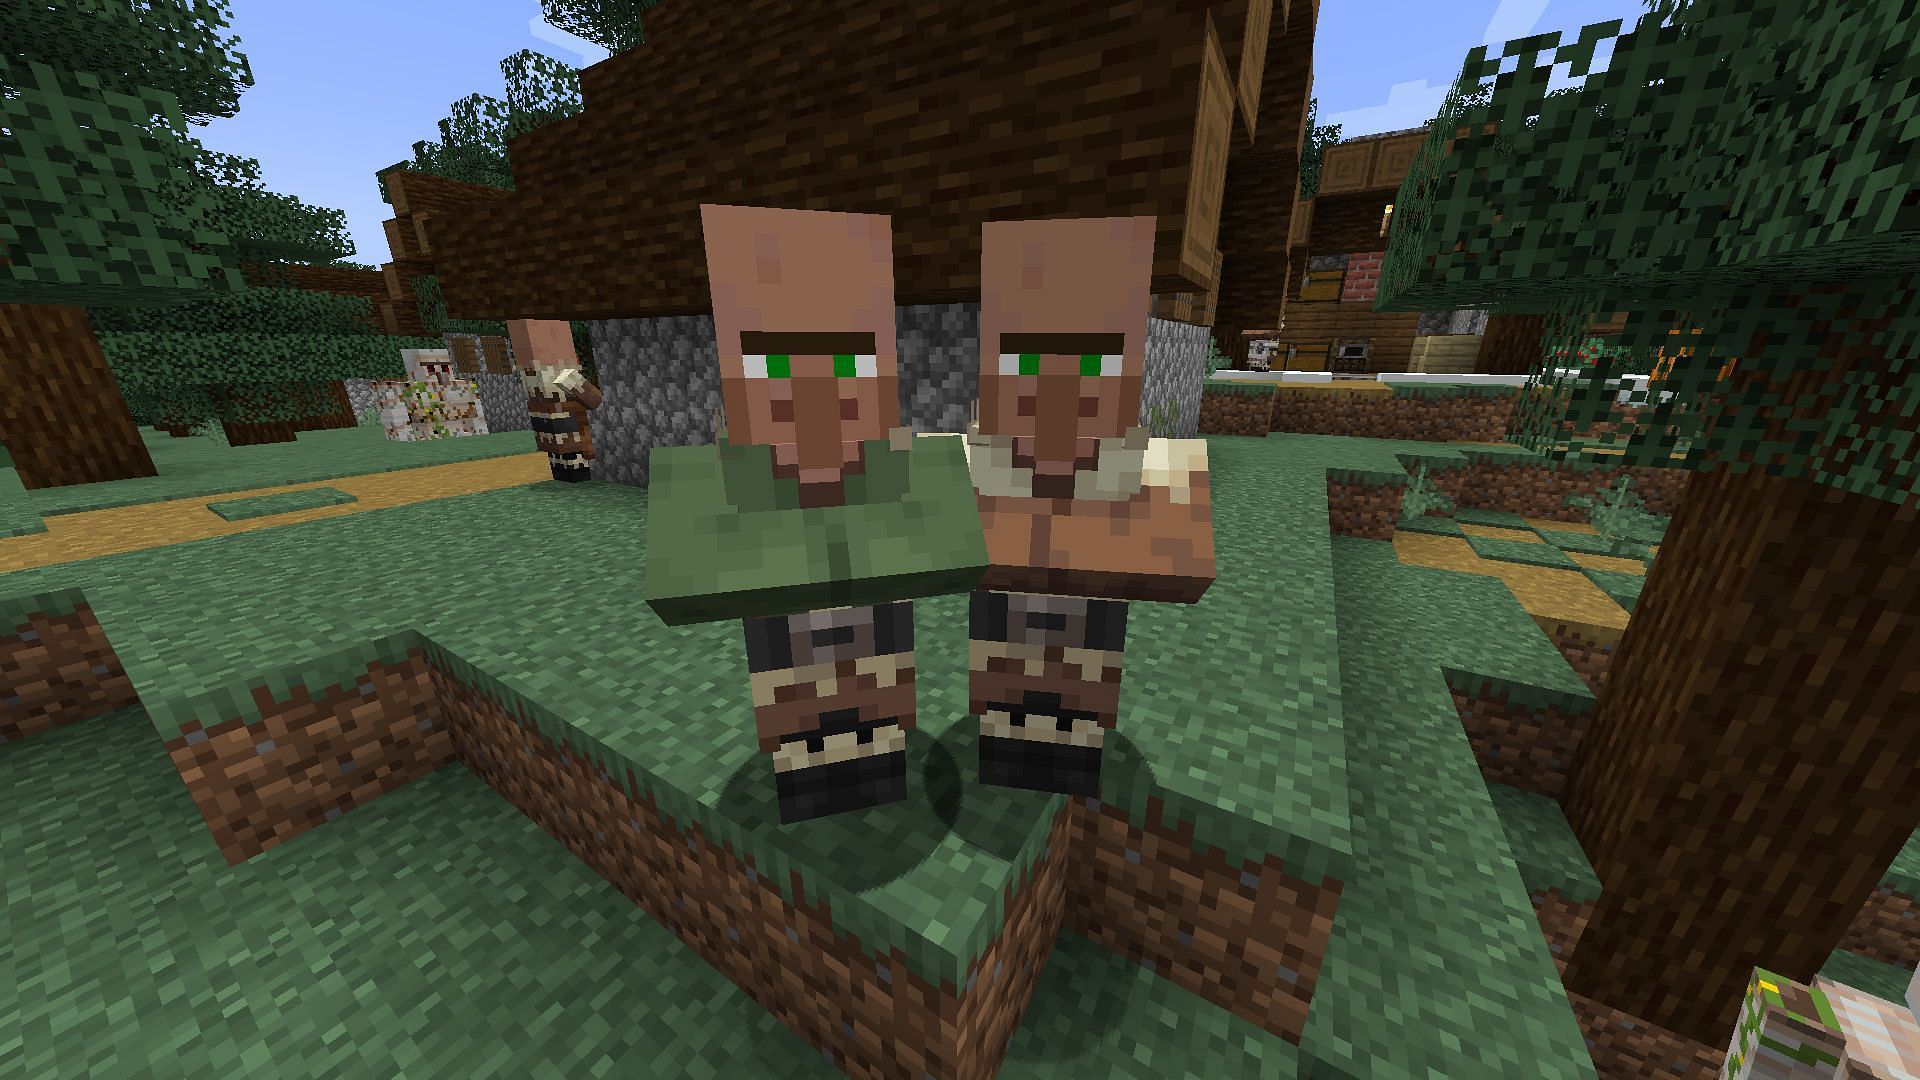 Difference between a nitwit and a regular villager in terms of appearance in Minecraft (Image via Mojang)